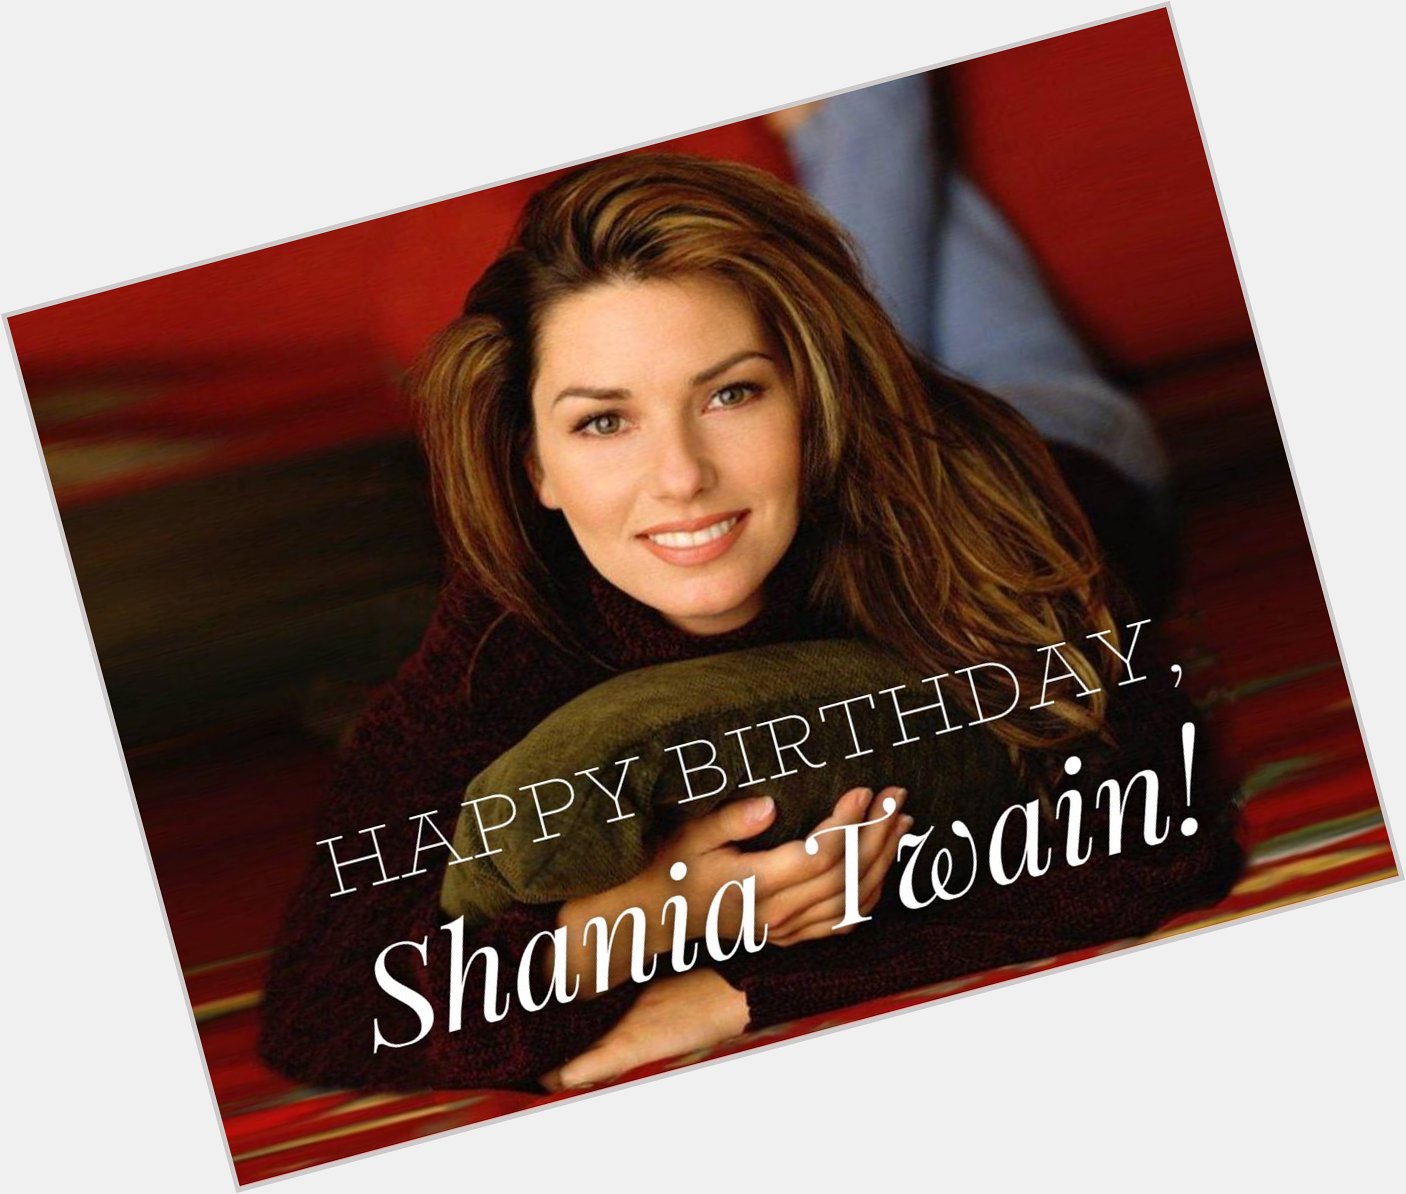 Happy Birthday, Shania! What s your favorite Shania Twain song?  